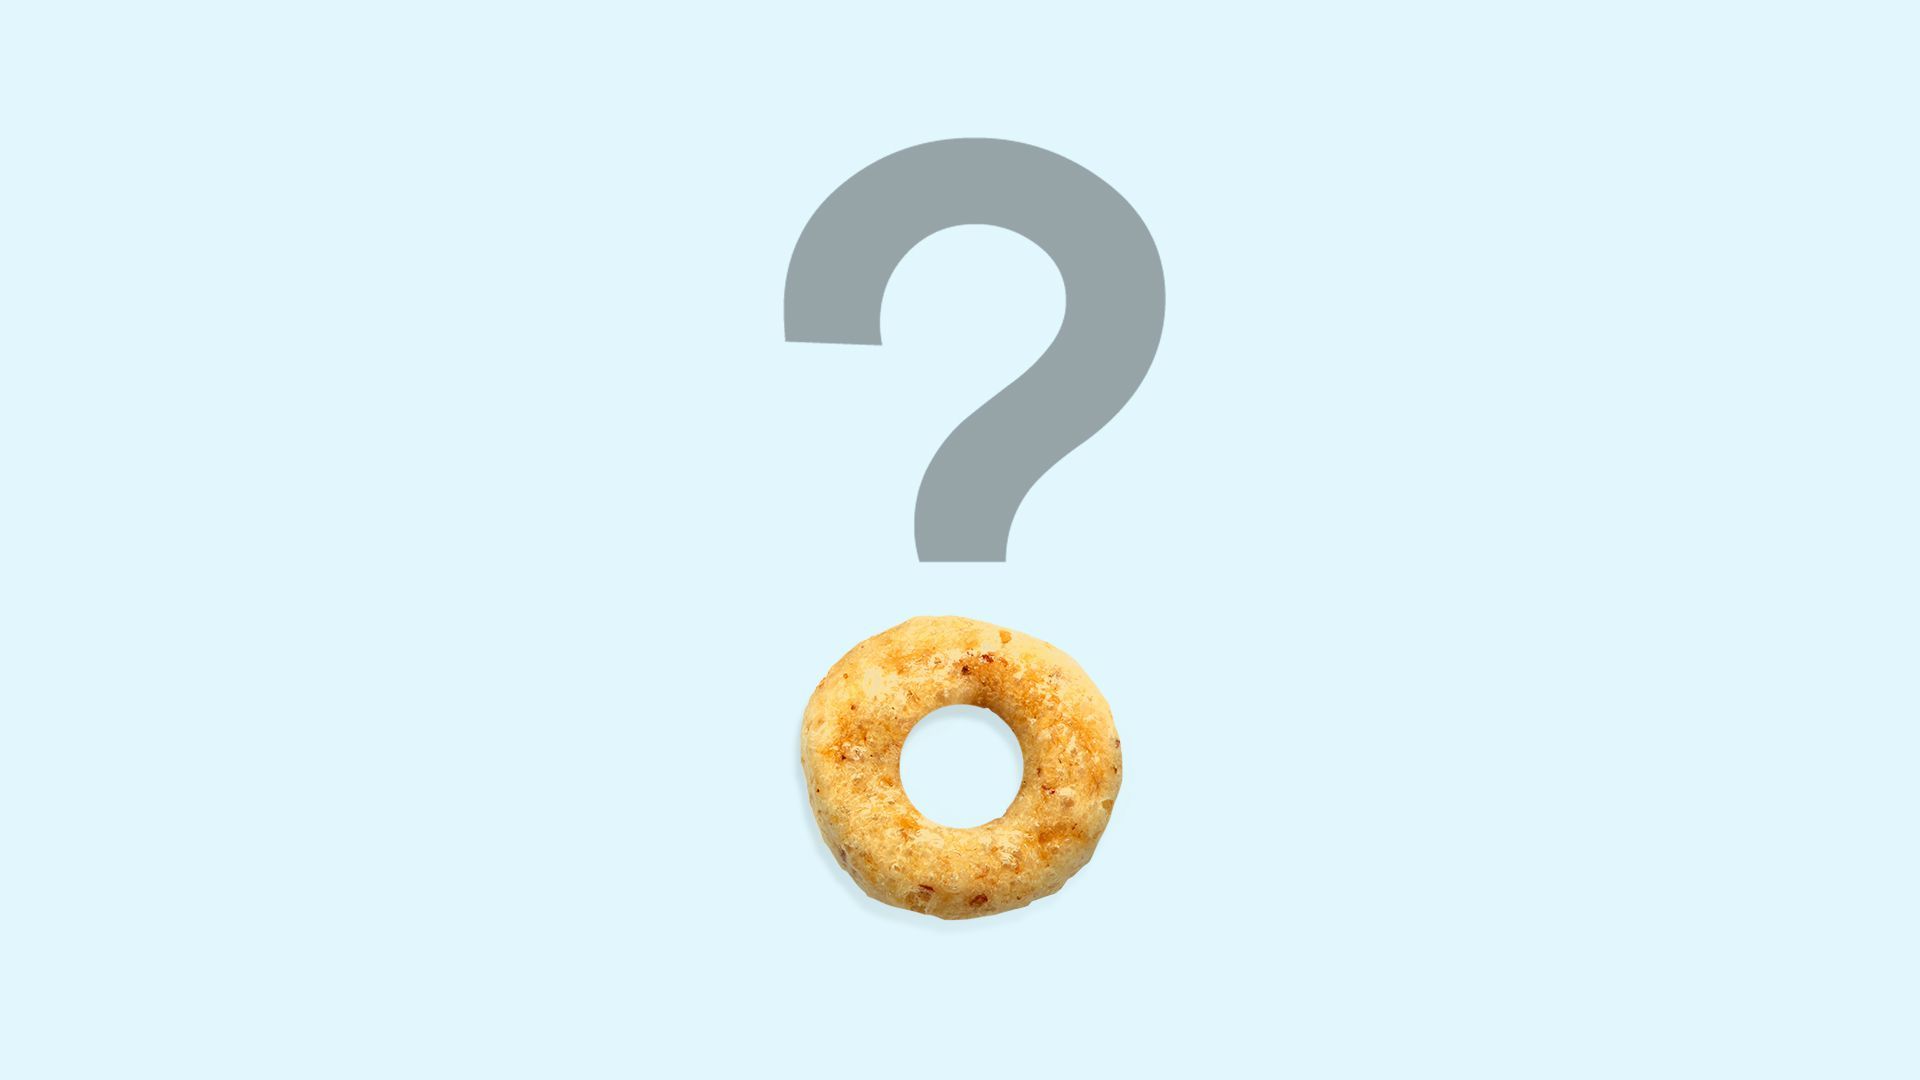 Photo illustration of a question mark with a cheerio instead of a dot at the end